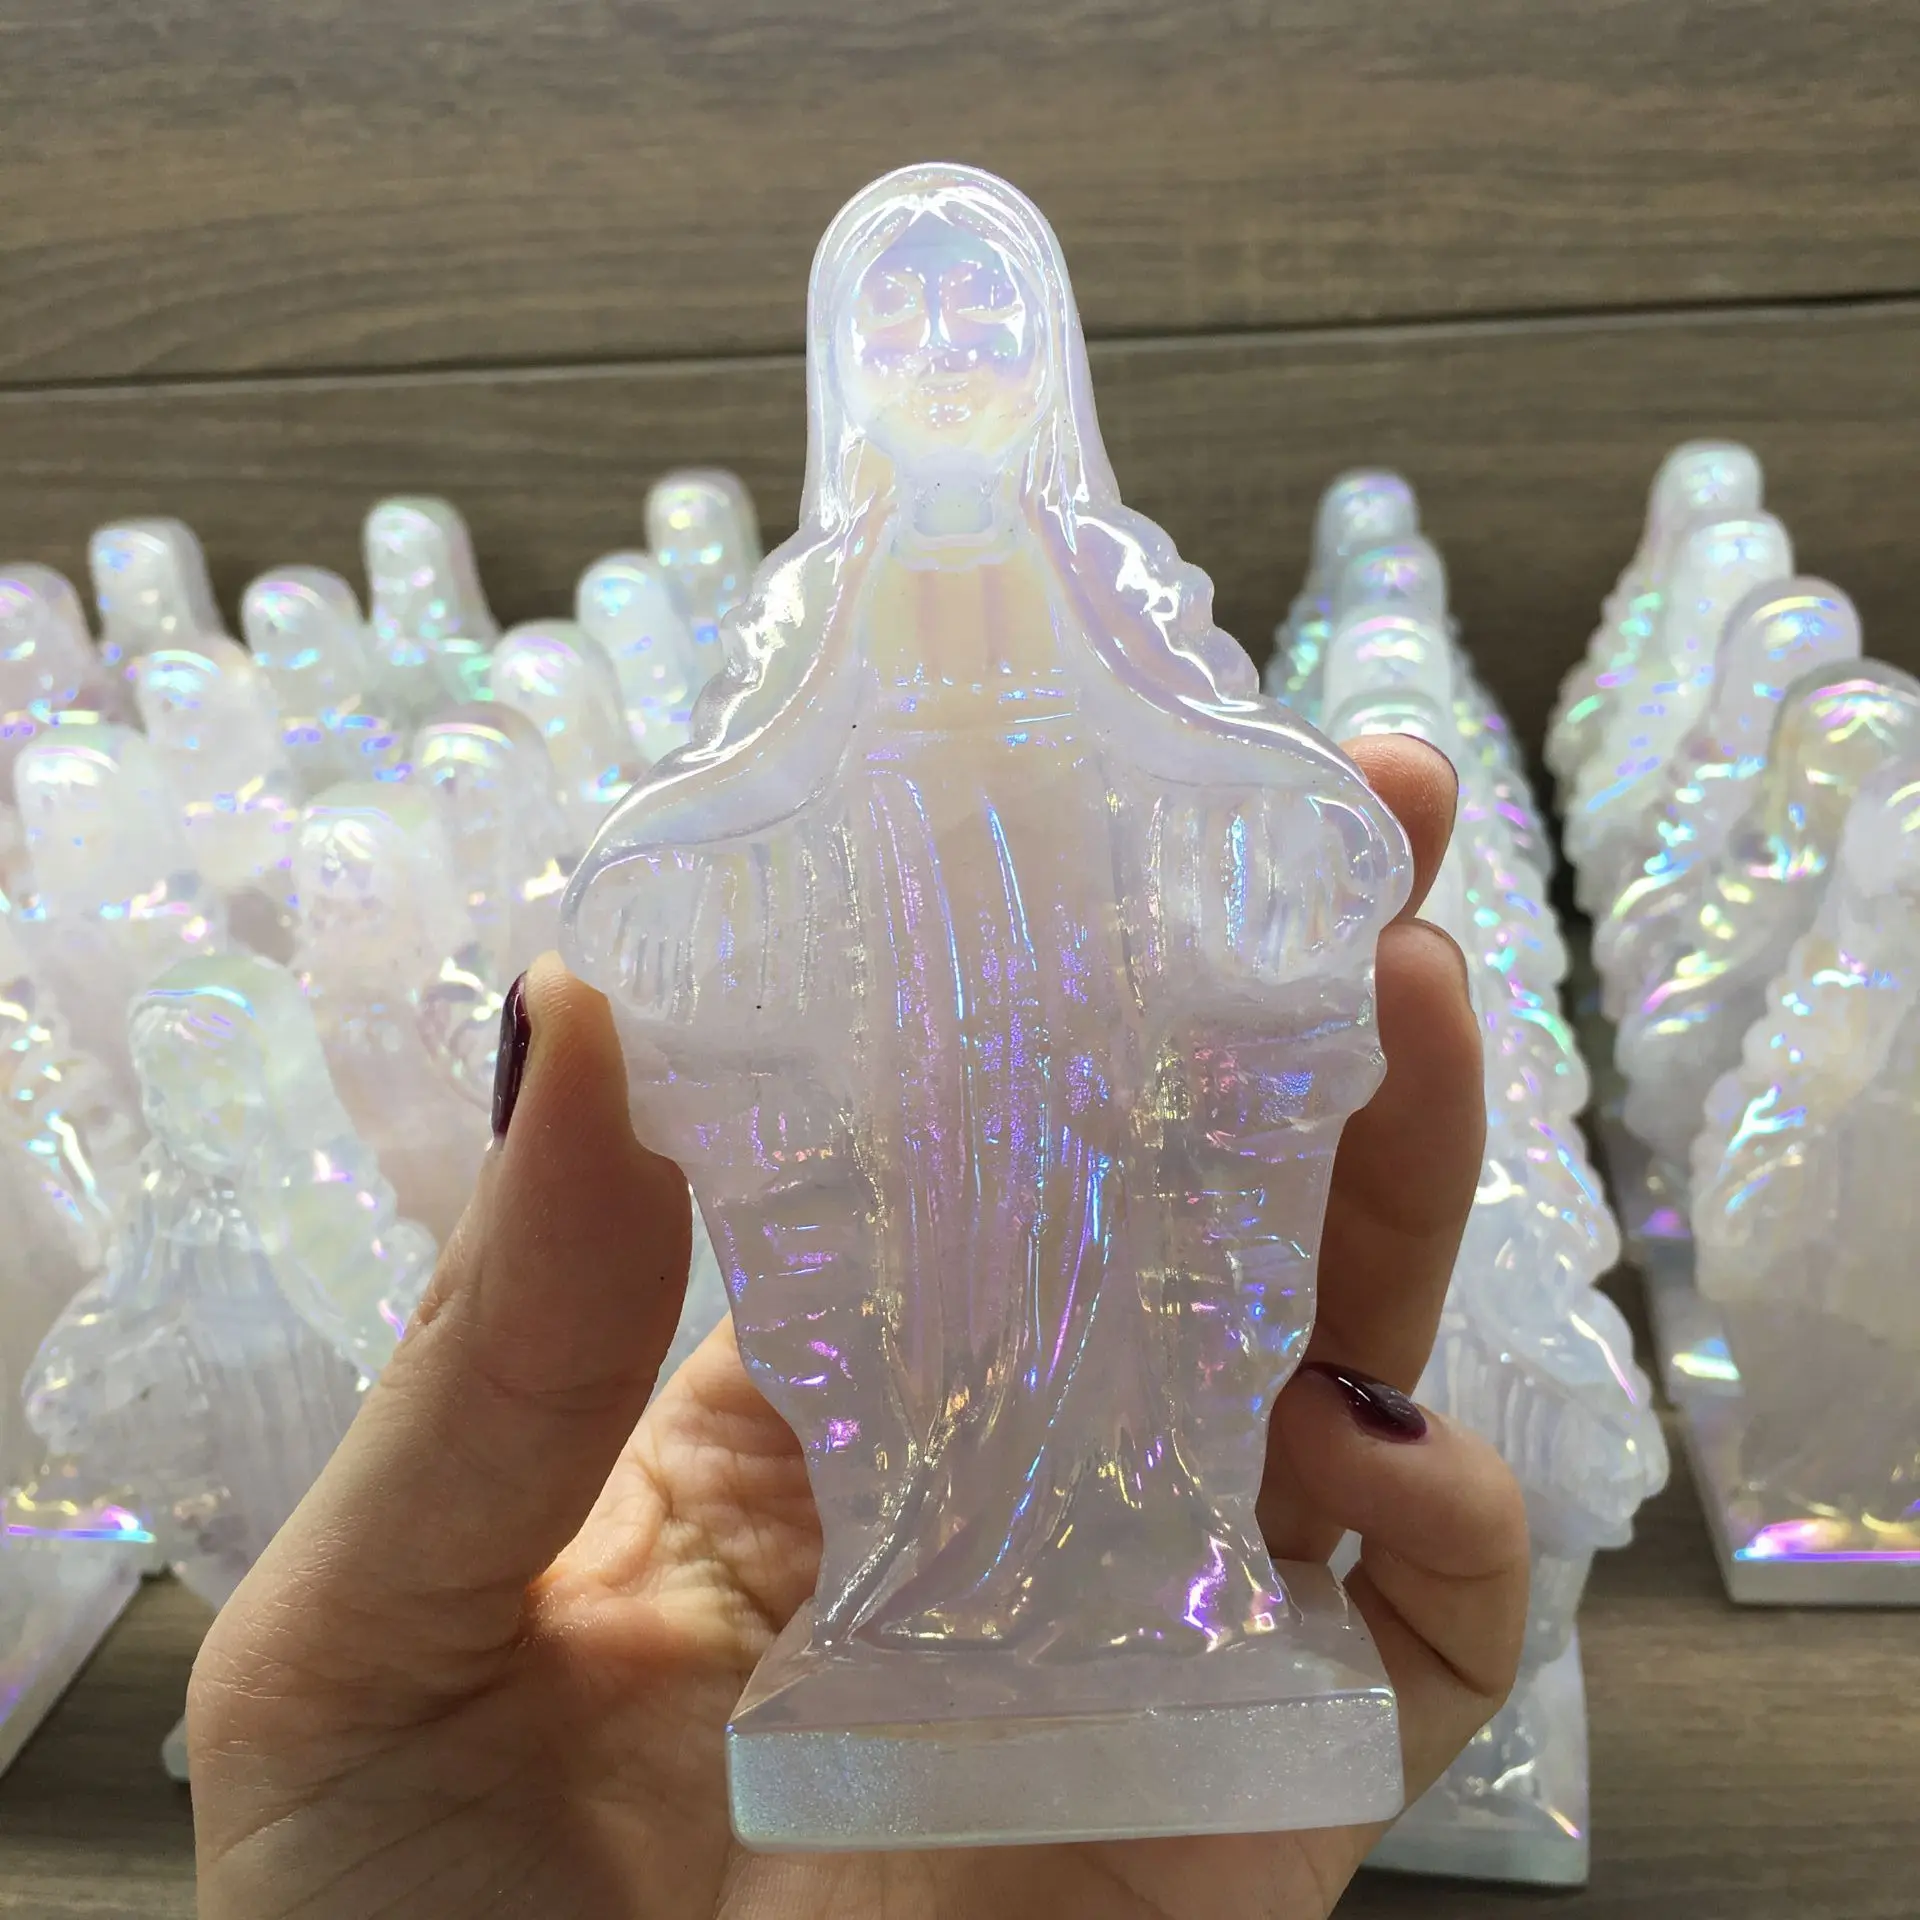 12.4cm Electroplated white crystal Virgin Mary Reiki health ornaments Goddess Sculpture With Base